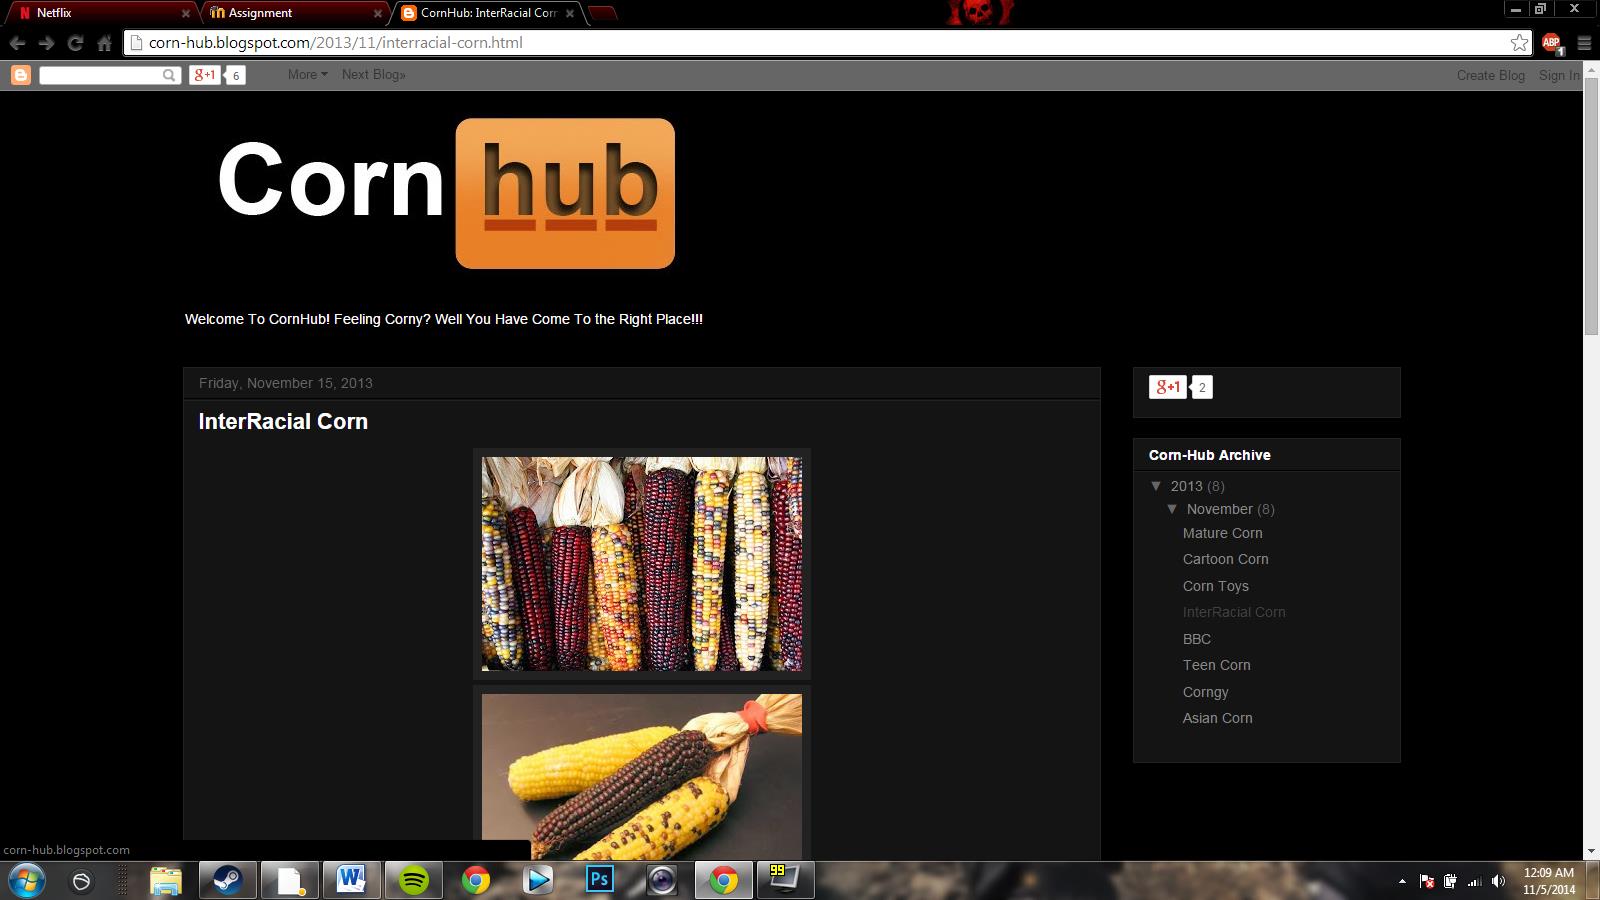 So there's a website called CornHub. 